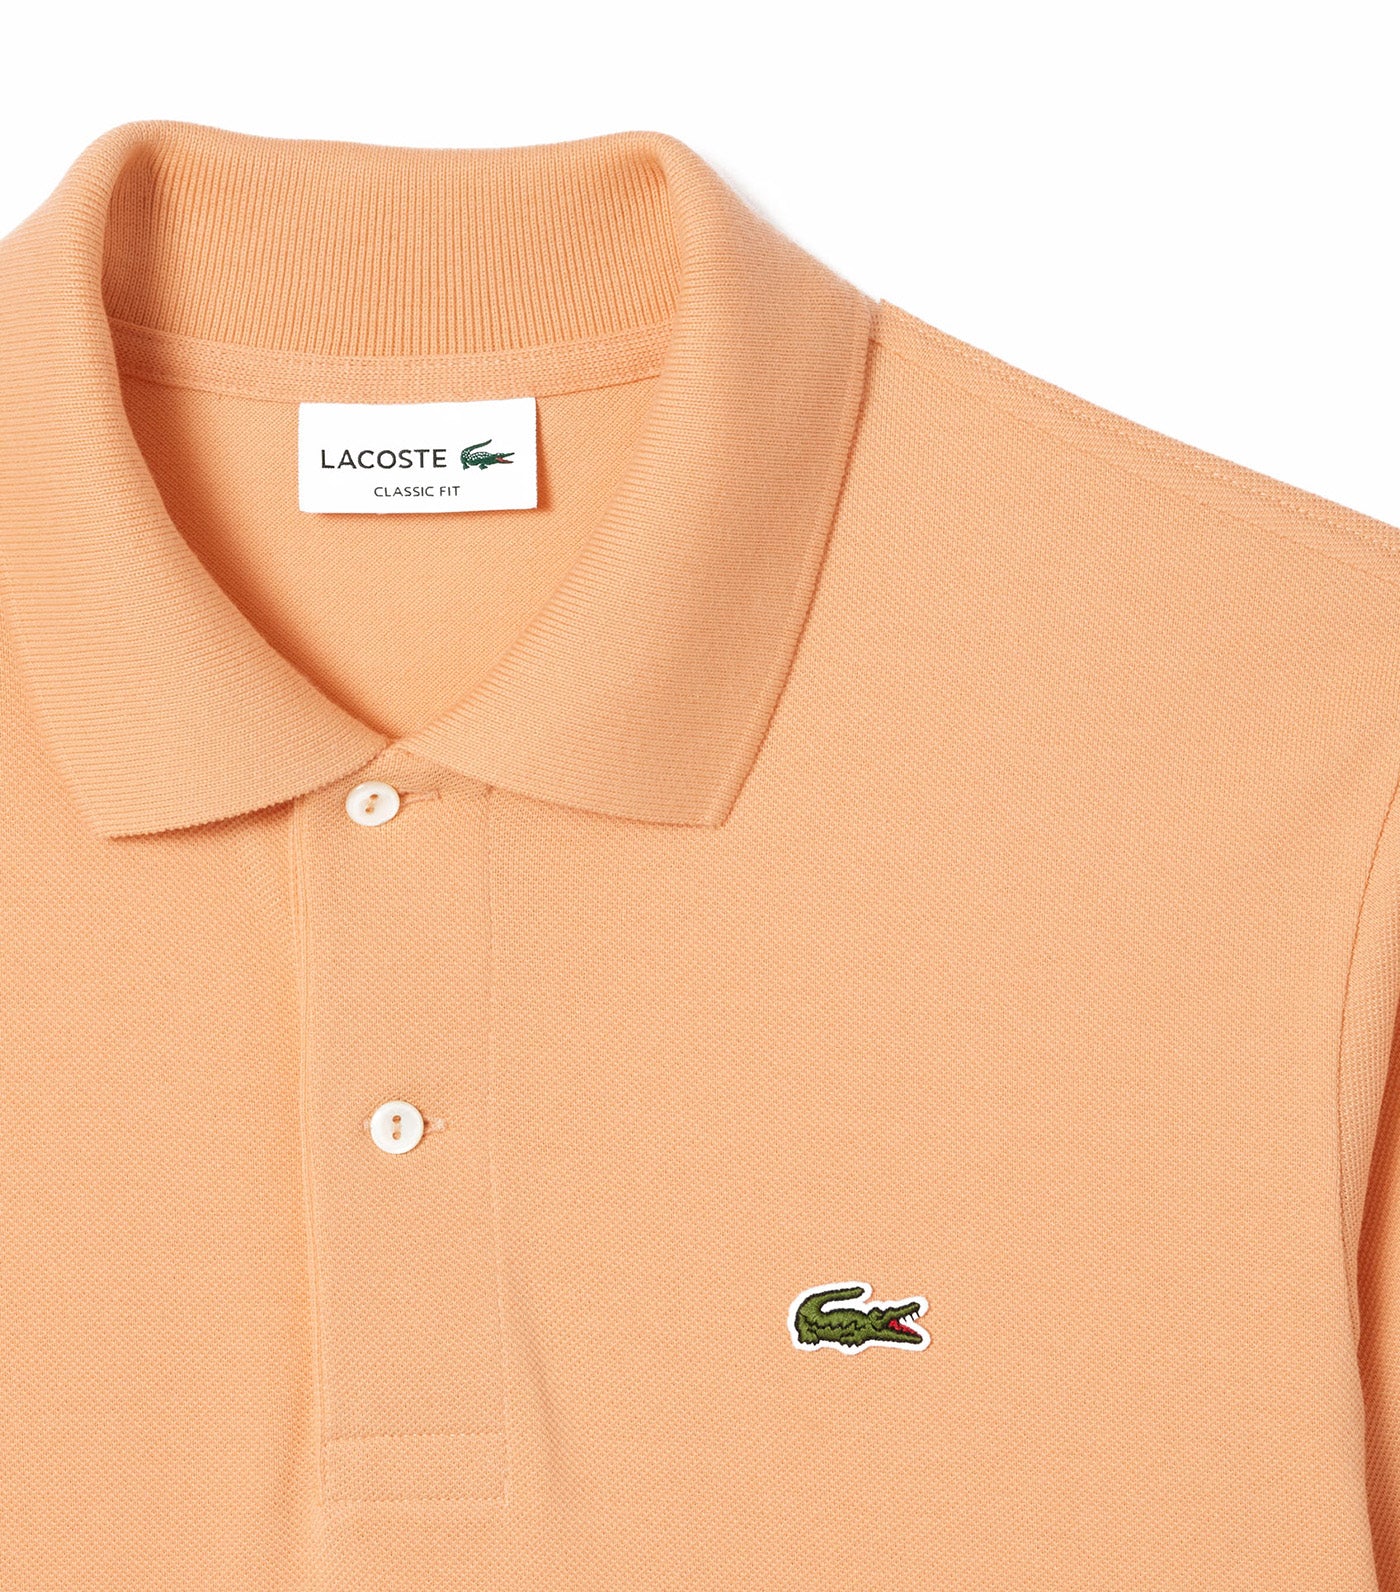 Lacoste Classic Fit L.12.12 Polo Shirt Cina